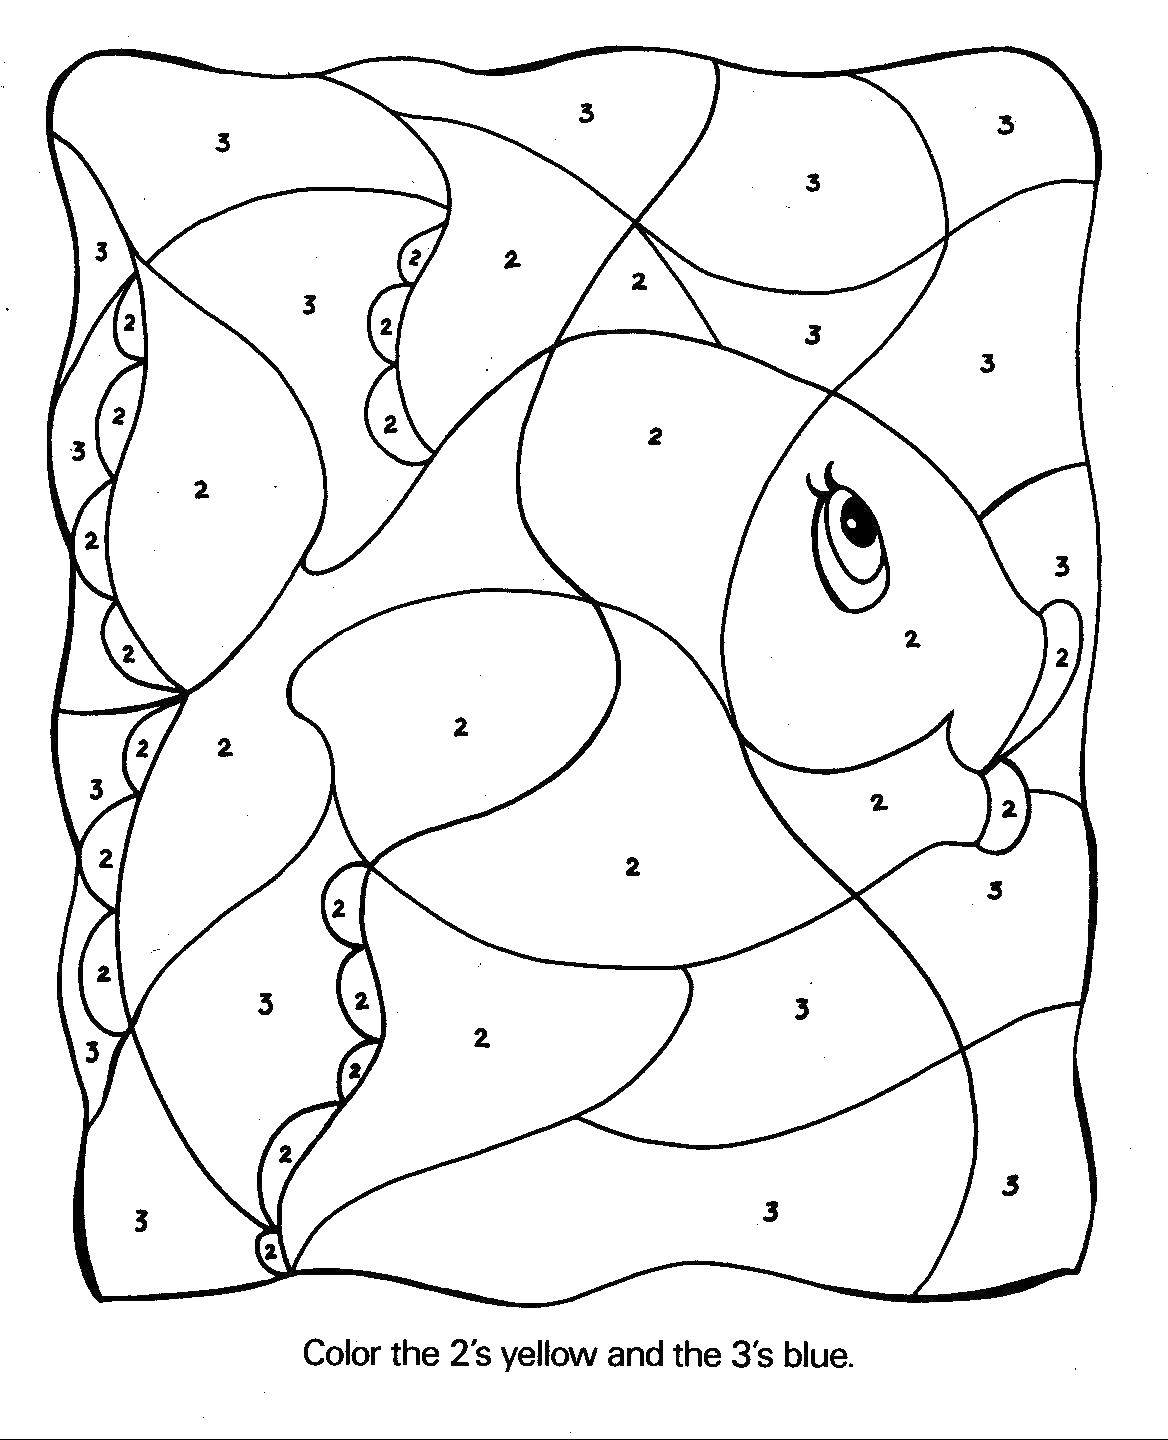 Coloring Paint a fish by the numbers. Category coloring by numbers. Tags:  by numbers, fish coloring pages.